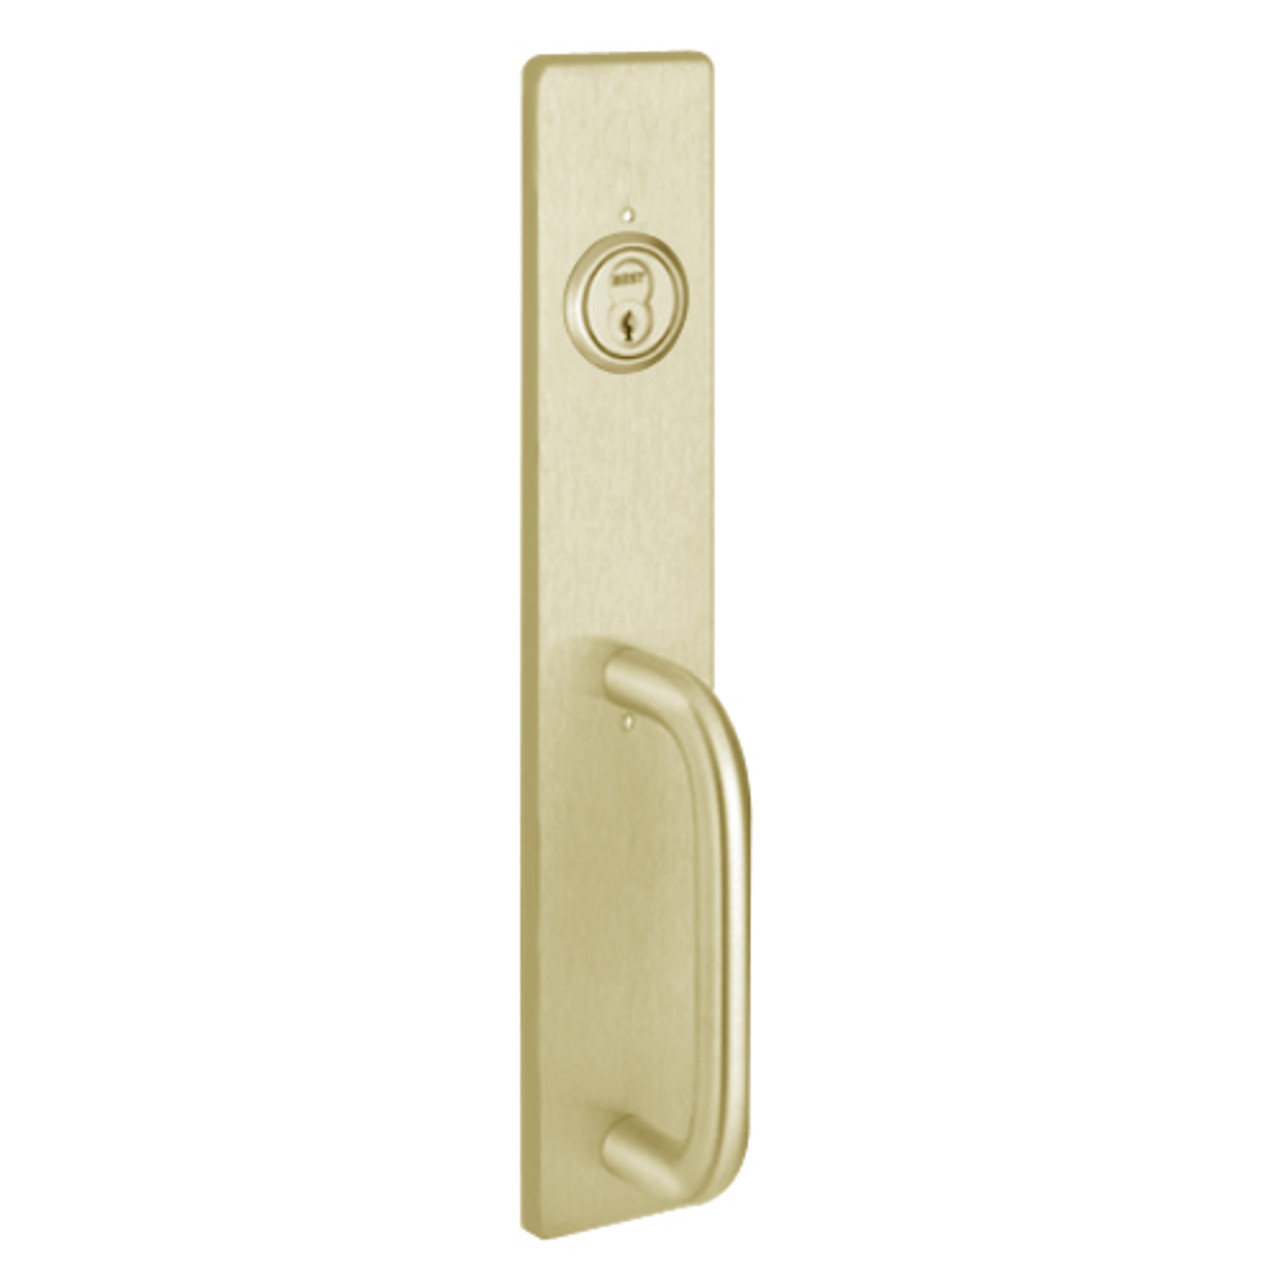 R1703C-606 PHI Key Retracts Latchbolt Retrofit Trim with C Design Pull for Apex and Olympian Series Exit Device in Satin Brass Finish